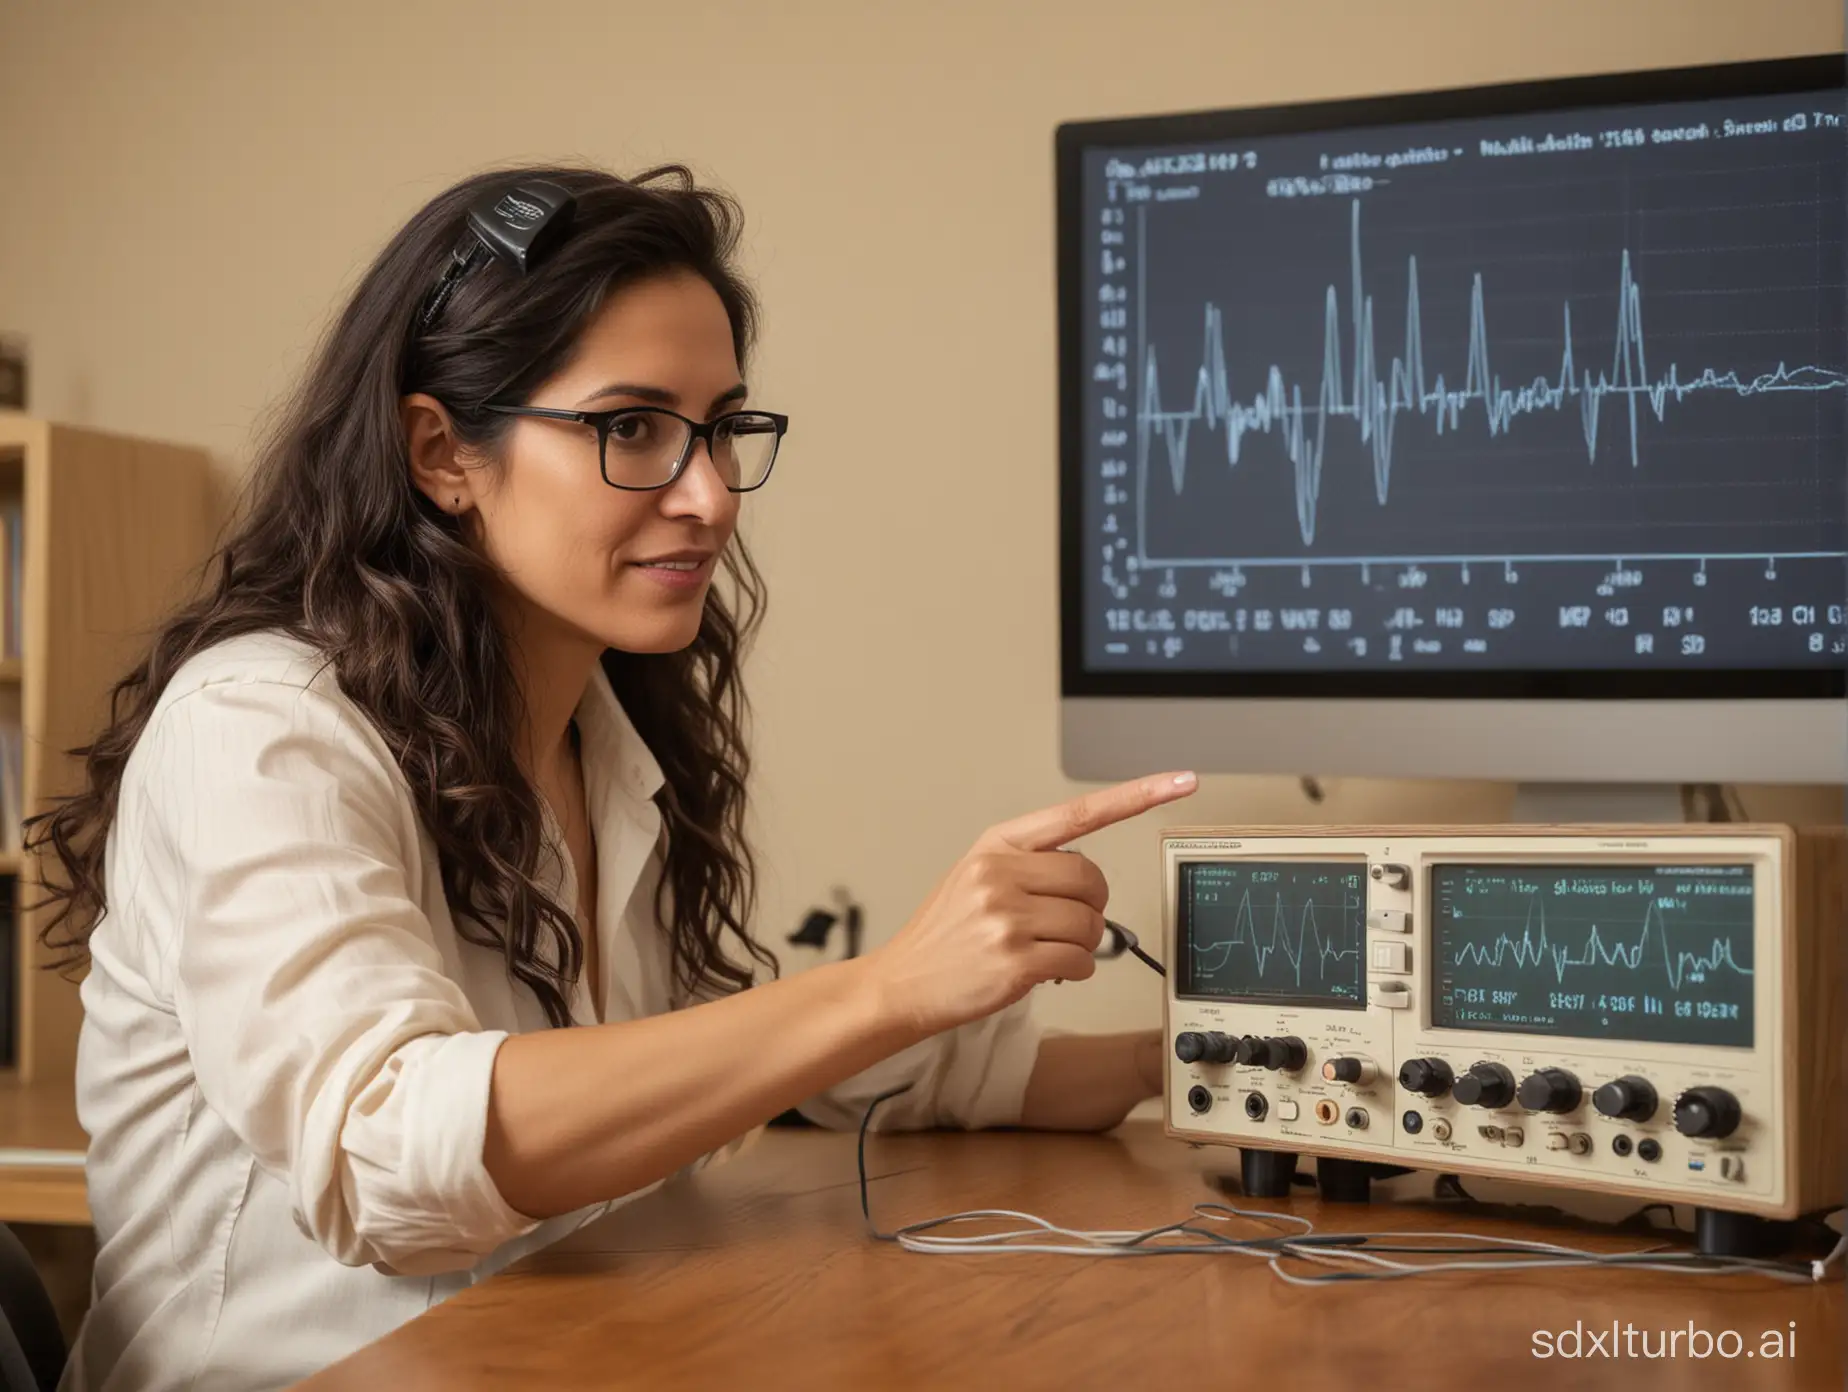 Latina-Female-Mathematics-Professor-Demonstrating-AC-Current-Sine-Wave-on-Oscilloscope-in-MusicFilled-Office